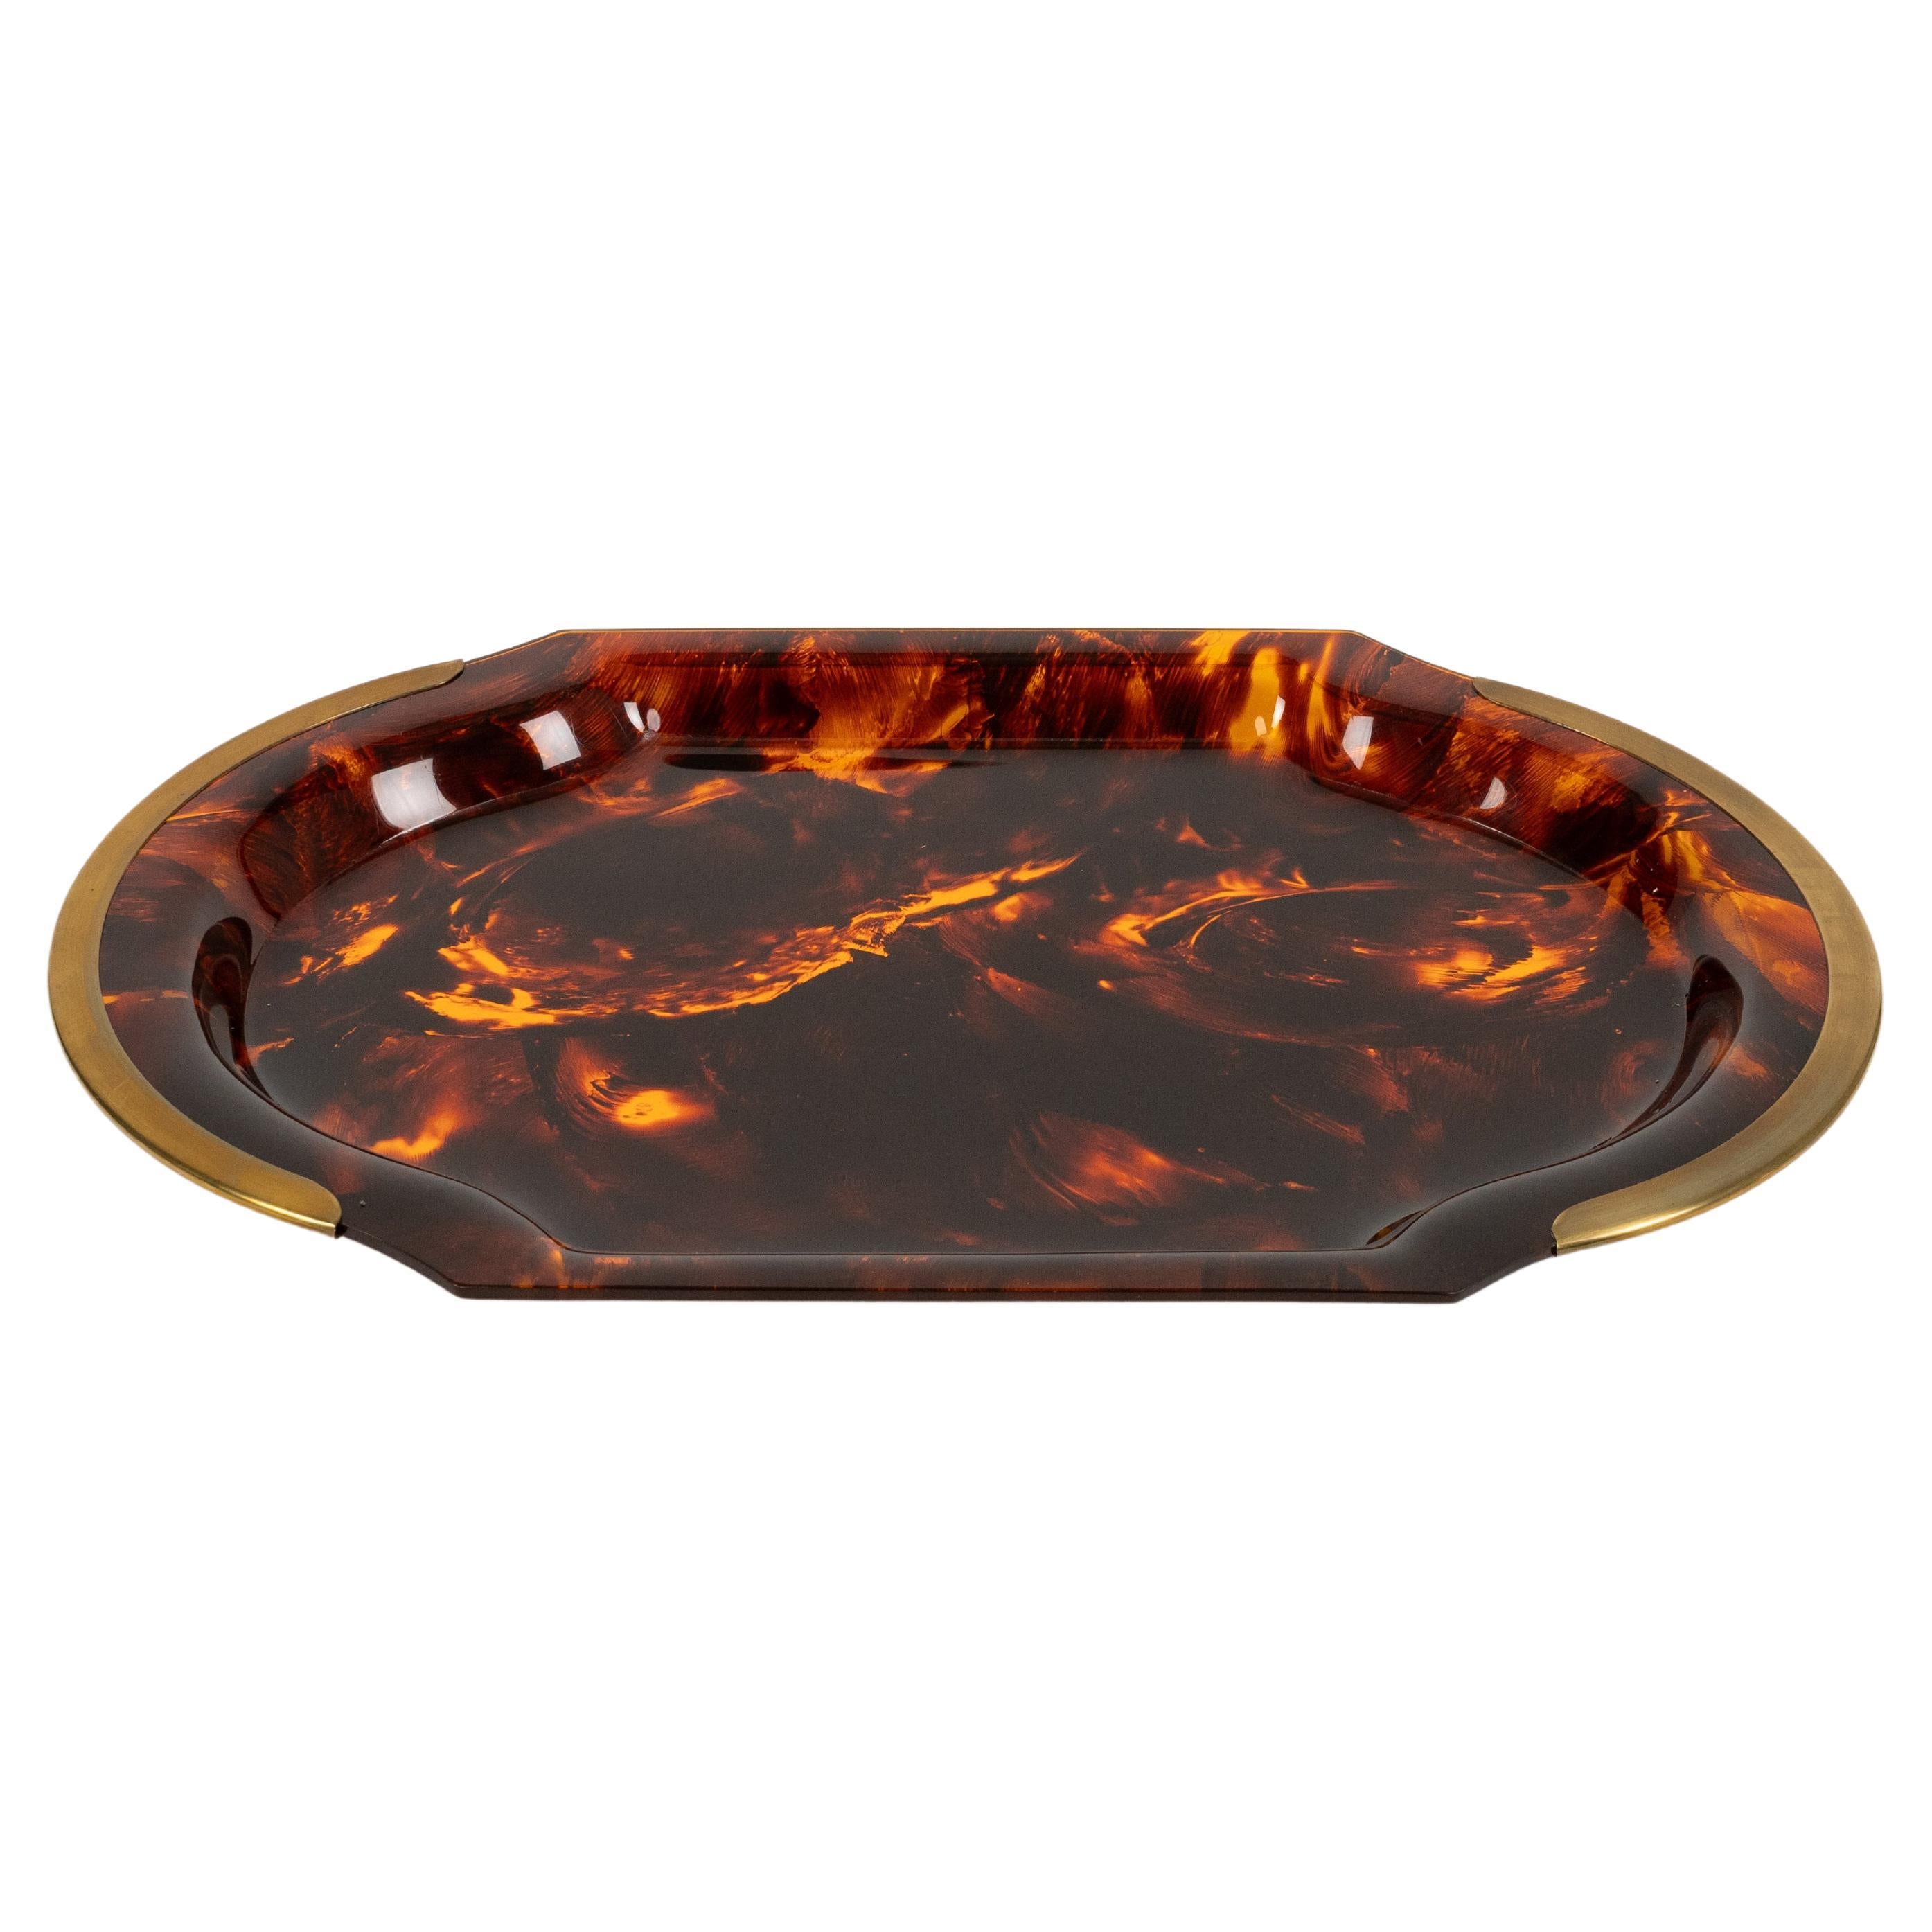 Serving Tray in Effect Tortoiseshell Lucite & Brass by Guzzini, Italy 1970s